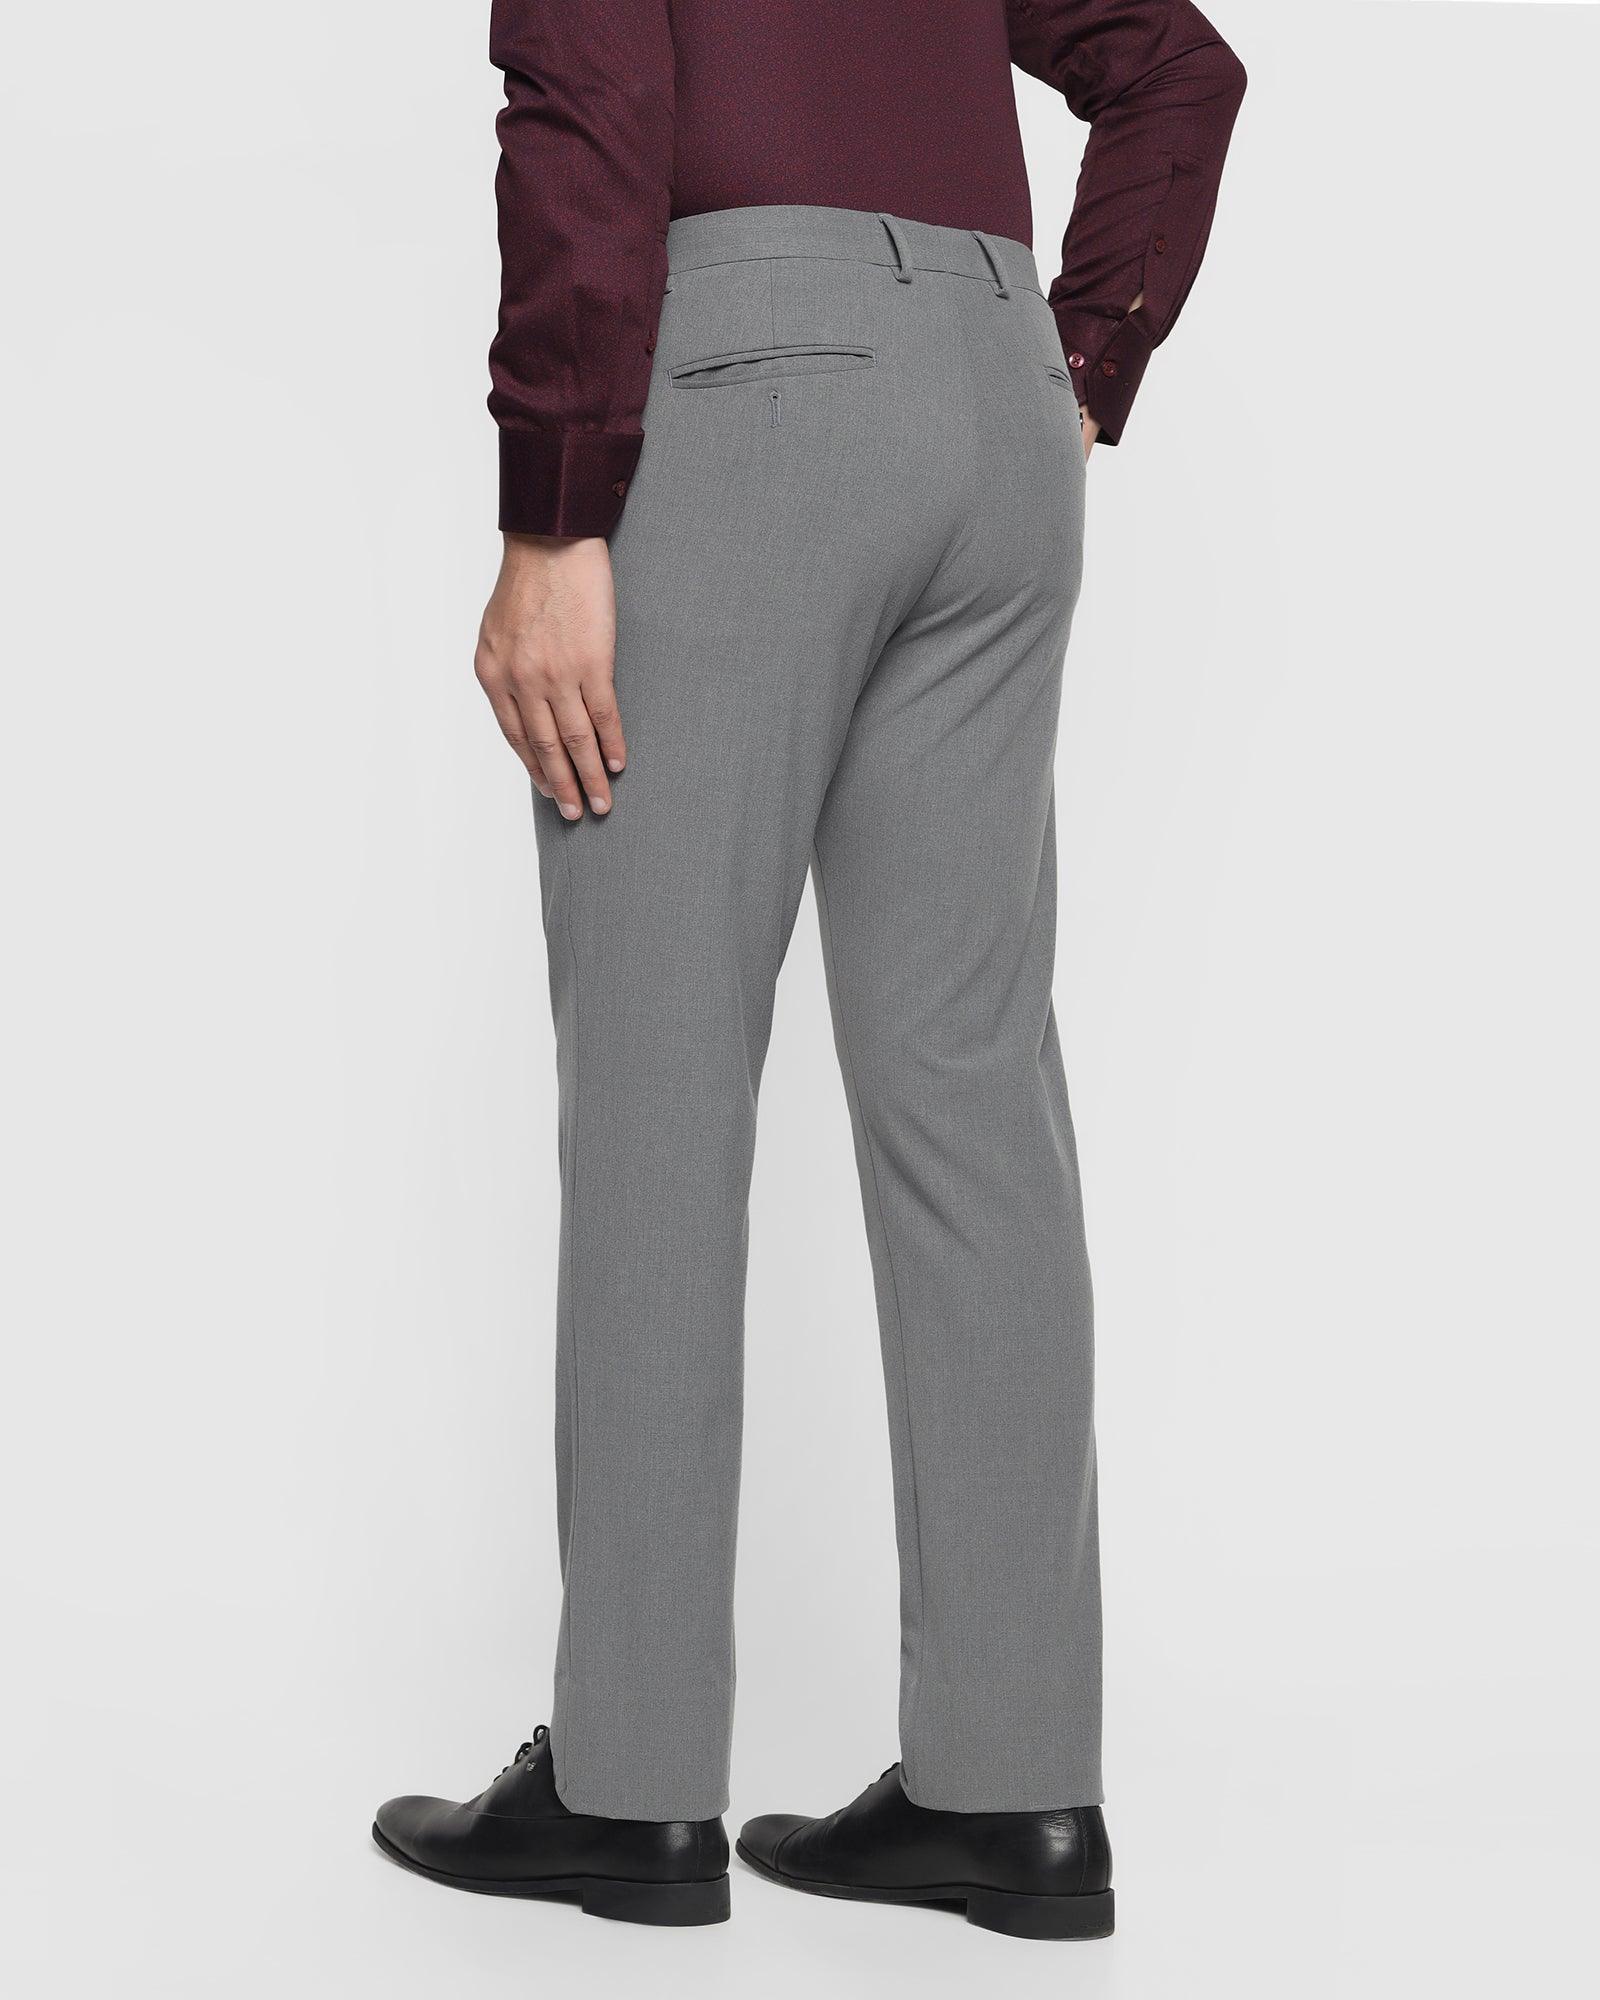 Buy Men Grey Carrot Fit Solid Flat Front Formal Trousers Online - 709540 |  Louis Philippe